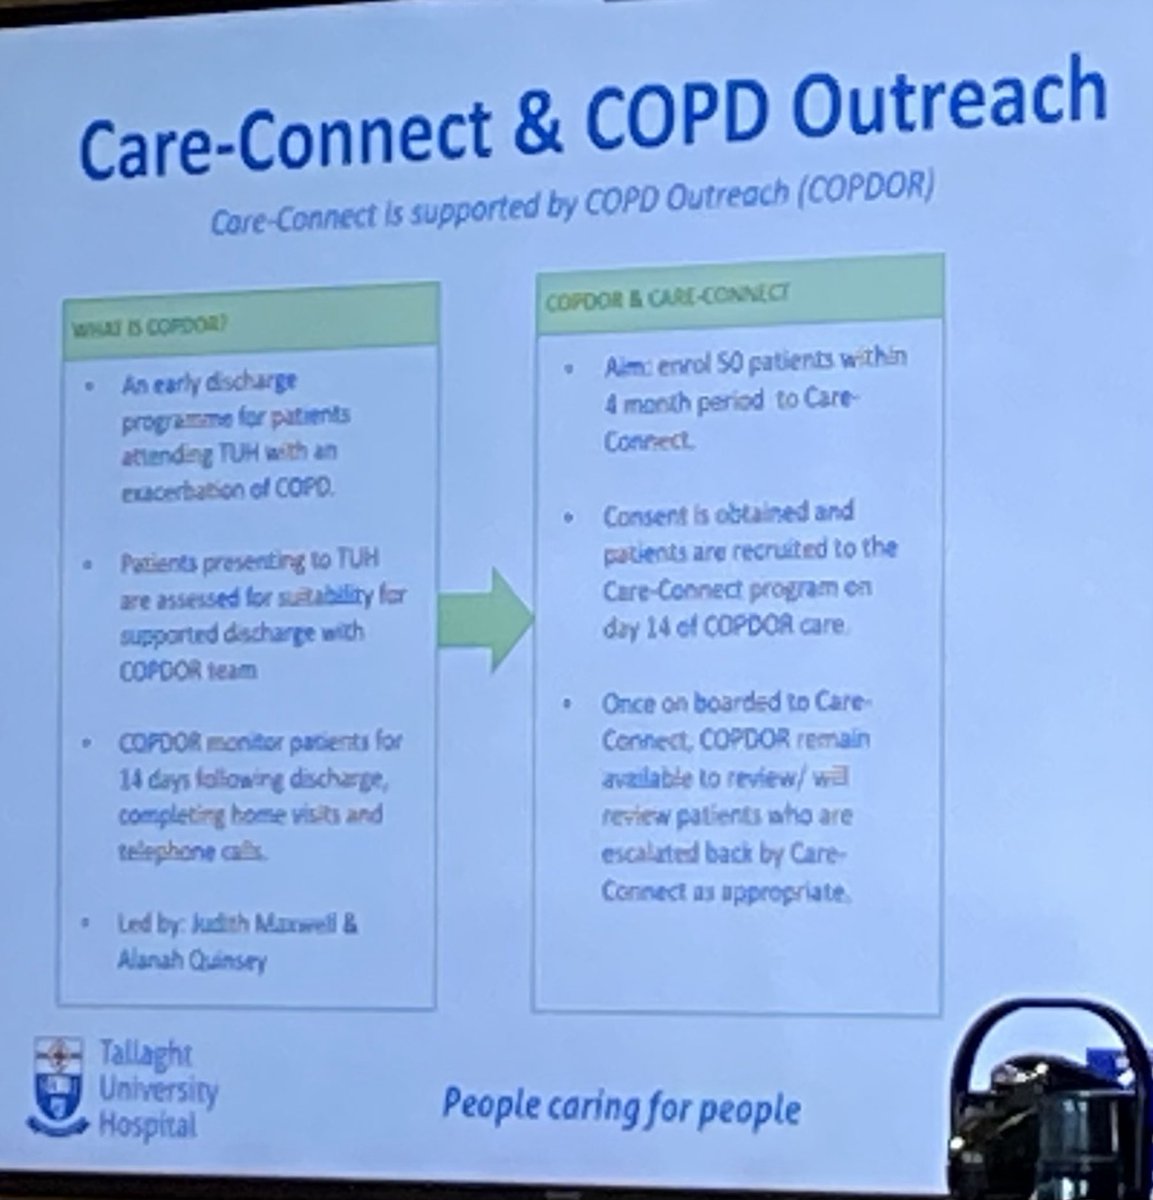 Well done to Judy & ⁦@Alanah_Q⁩ on their innovative work in #COPDOR with Care-Connect to support patients with remote monitoring to maintain them safely at home ⁦@TUH_Tallaght⁩ ⁦@CPRC_ISCP⁩ ⁦@ainemlynch⁩ ⁦@eimearculligan⁩ ⁦@AineOBrien8⁩